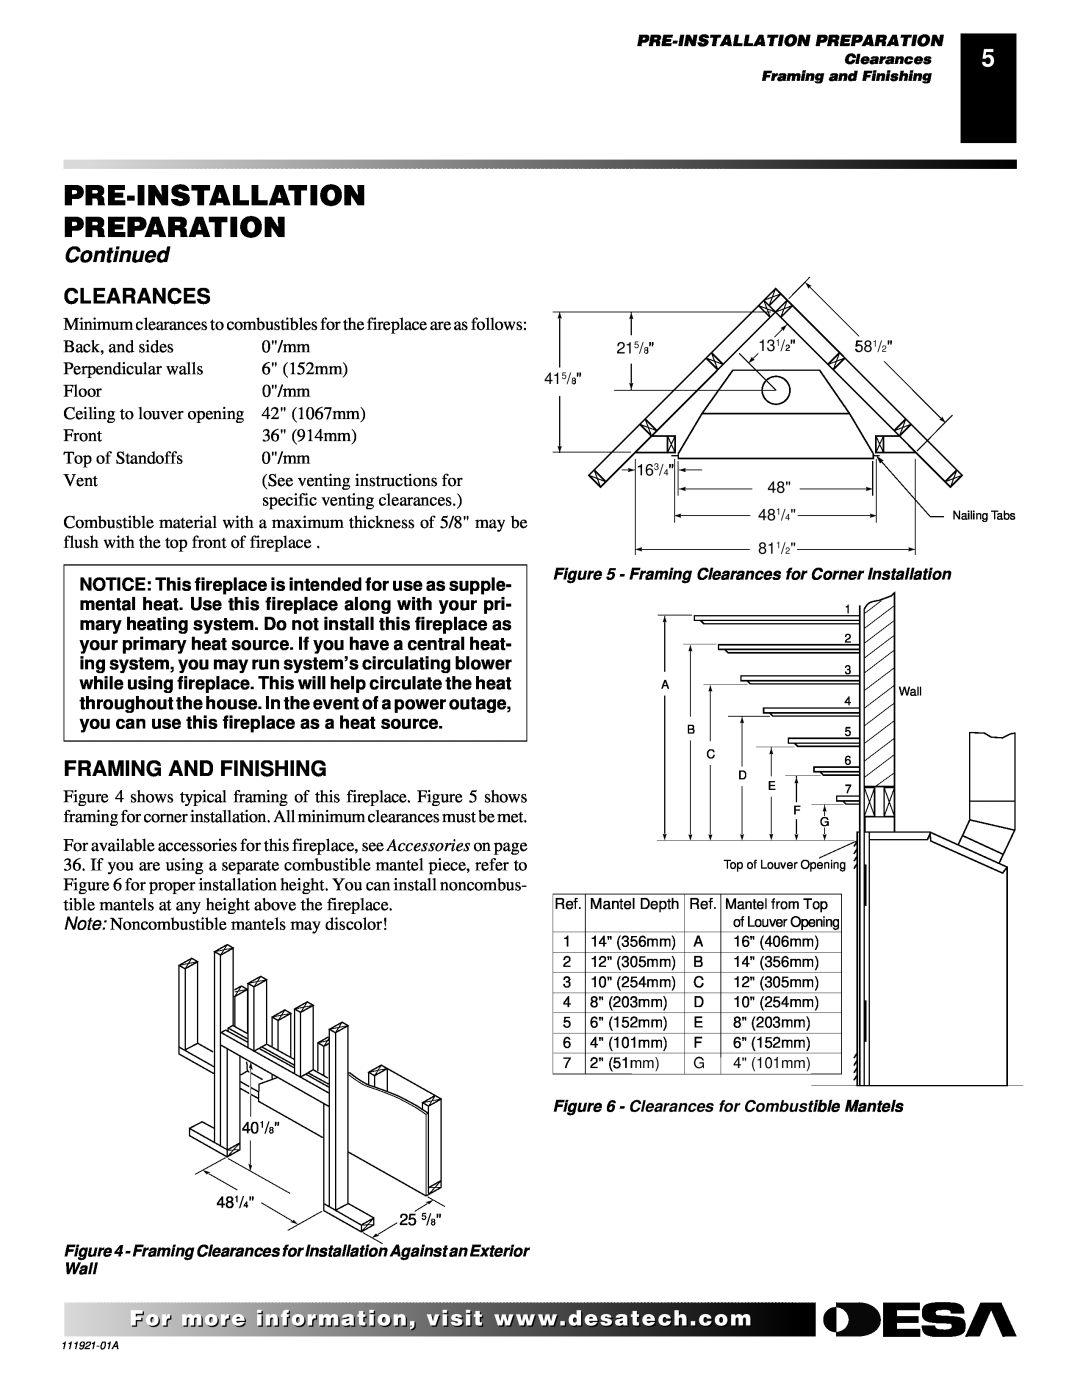 Desa (V)K42N installation manual Clearances, Framing And Finishing, Pre-Installation Preparation, Continued 